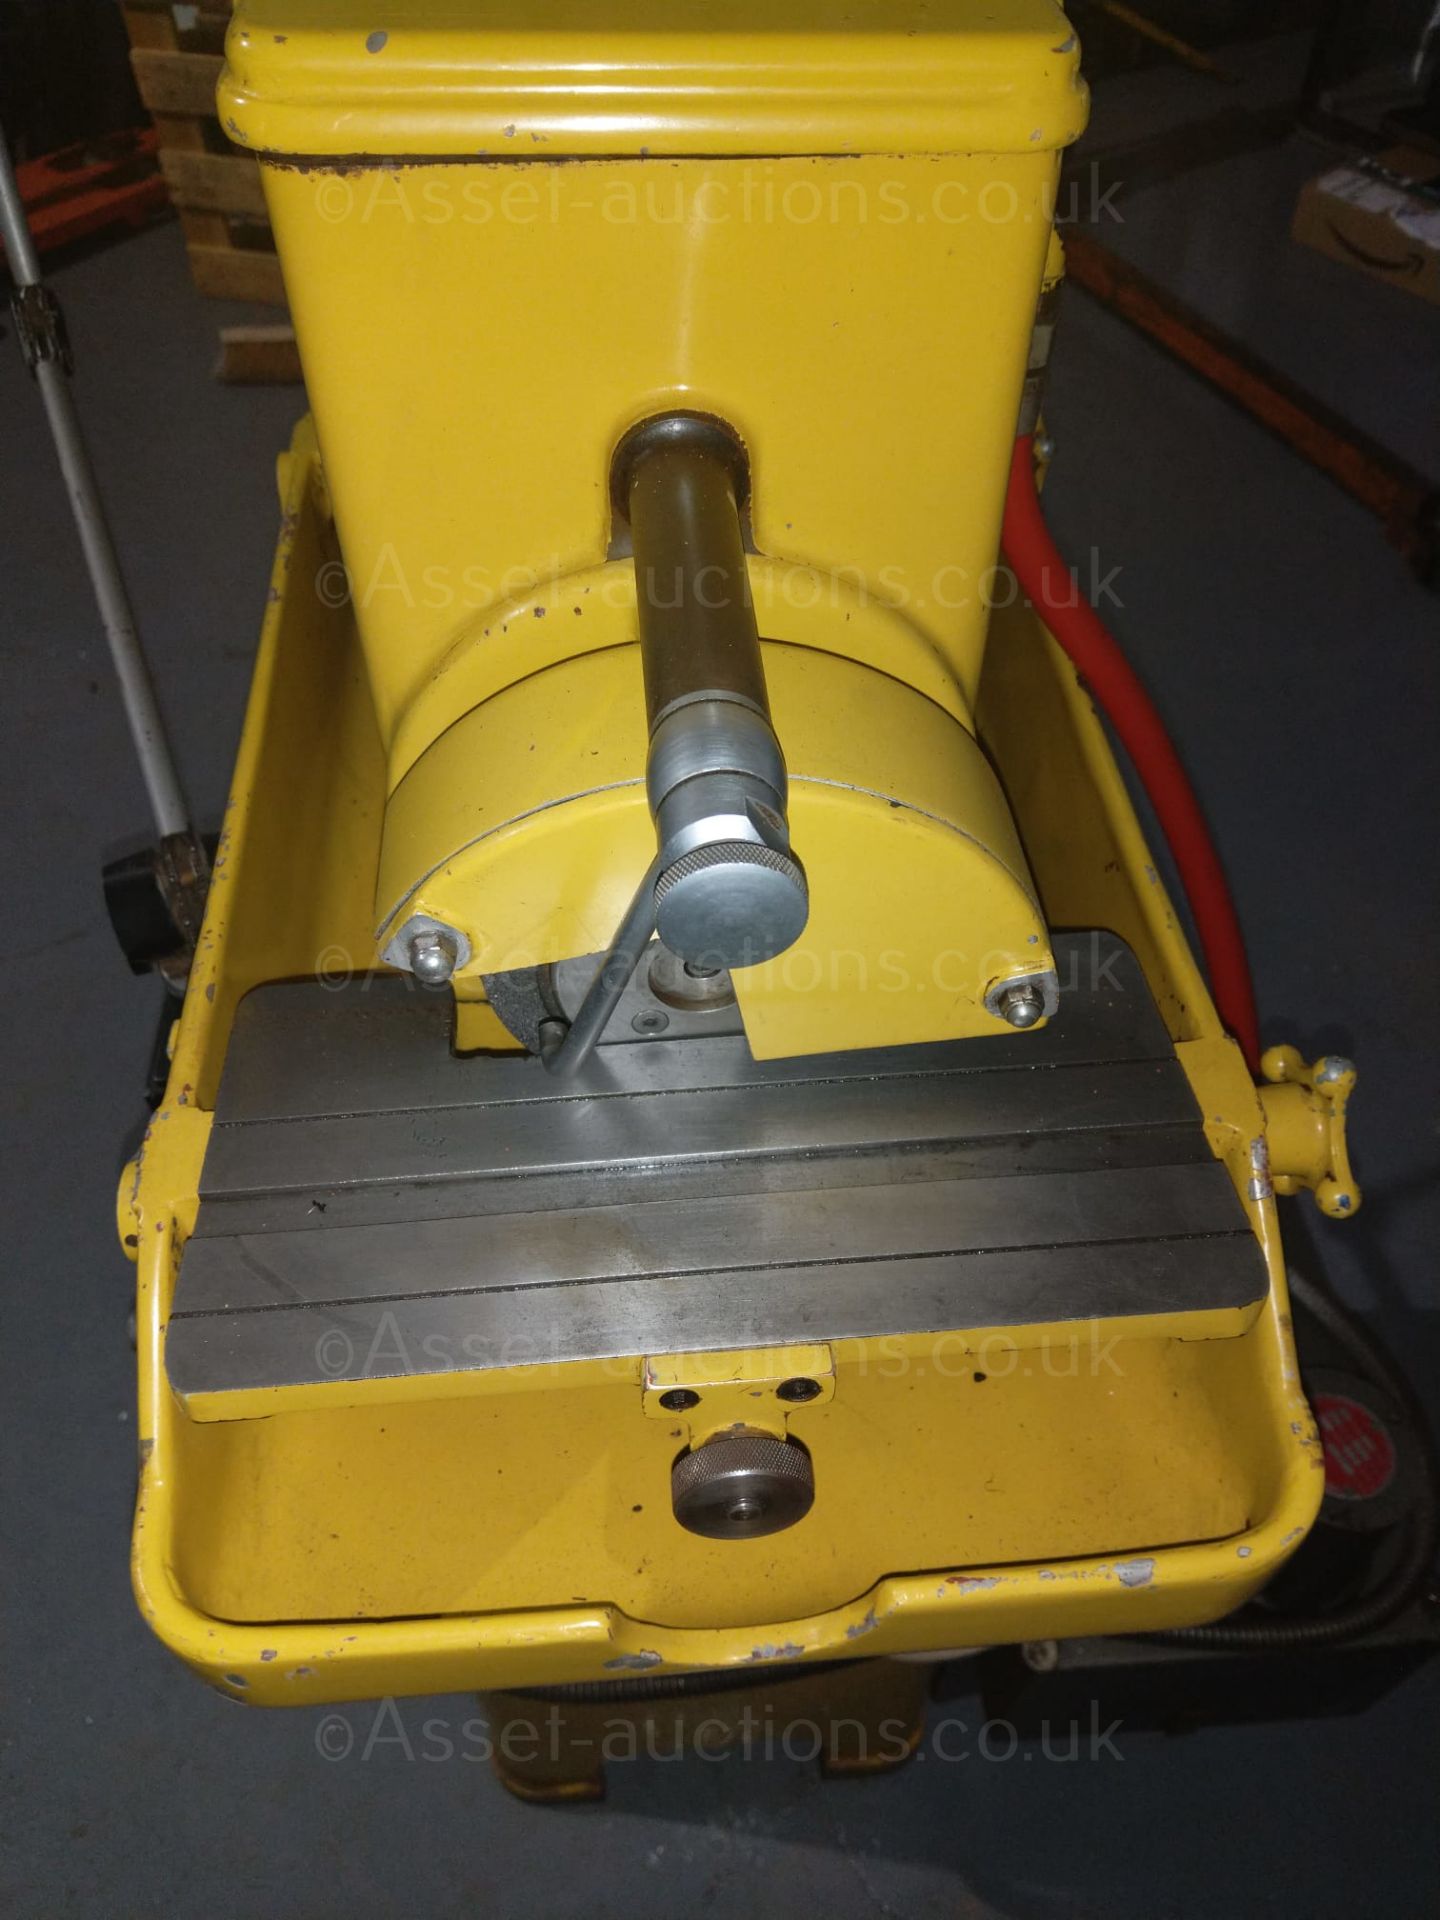 ABWOOD TOOL GRINDER LAPPING MACHINE, DOUBLE HEADED, COOLANT TANK, IN GOOD WORKIN GORDER *NO VAT* - Image 5 of 6